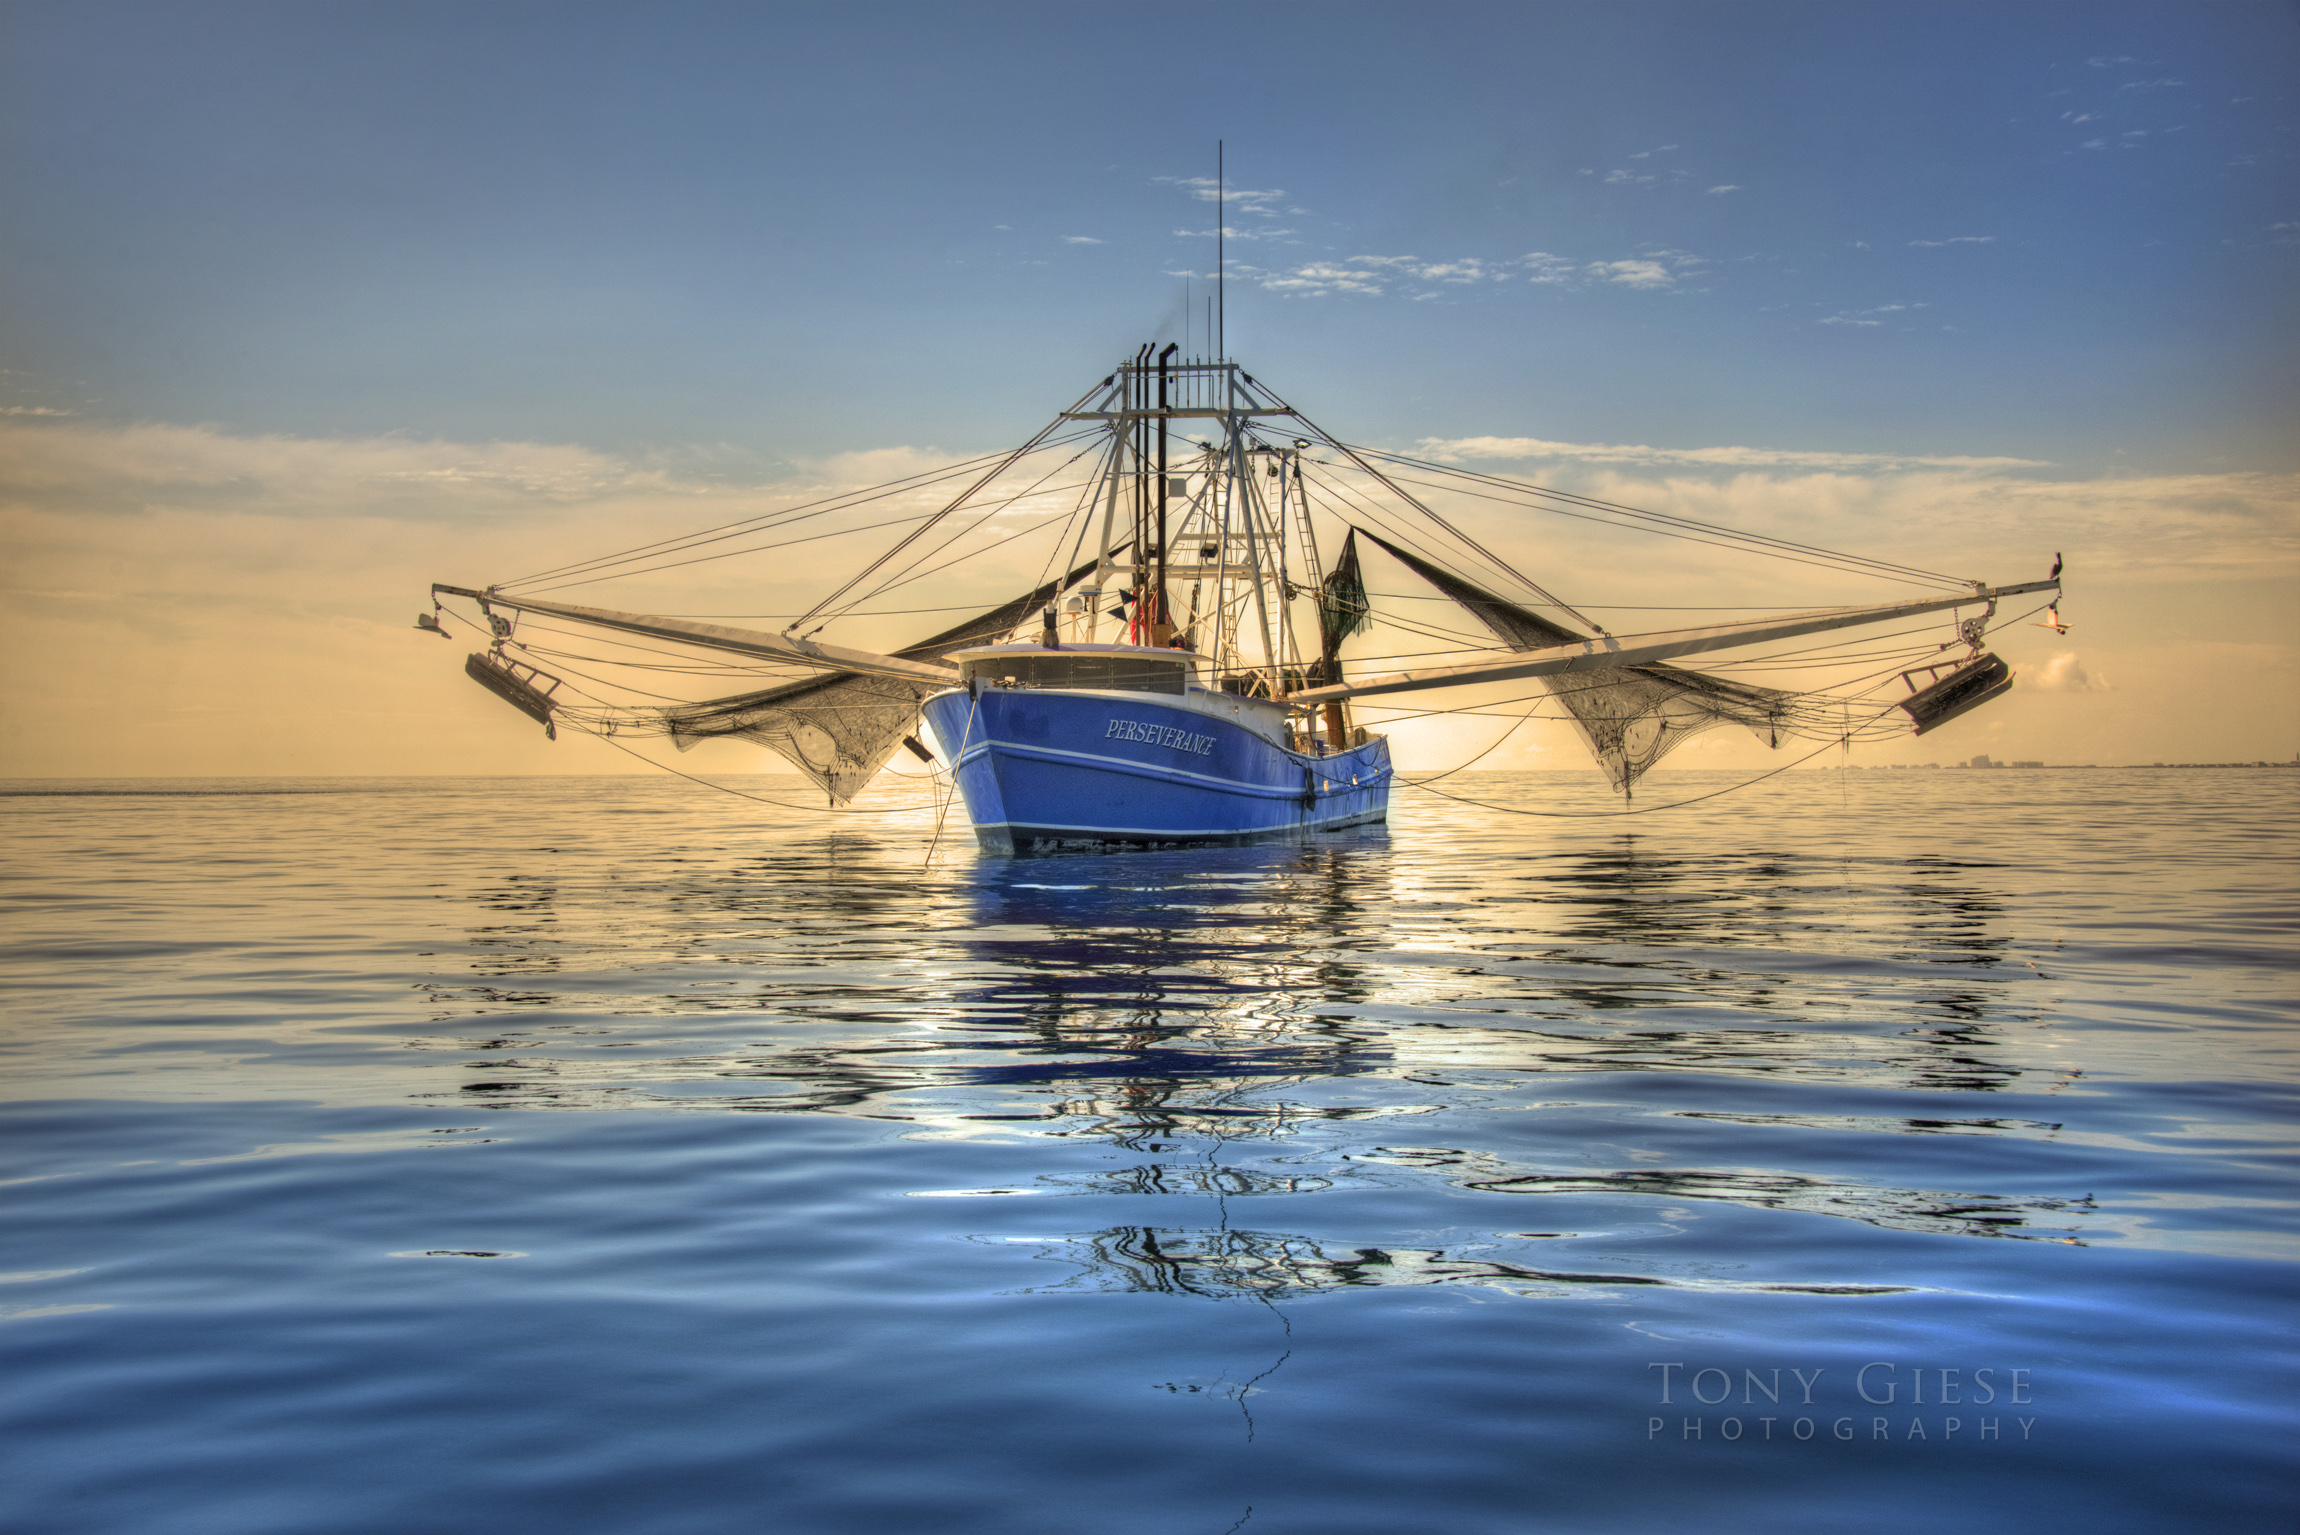 Shrimp boat resting with nets up. Upon calm ocean. Offshore Daytona Beach.